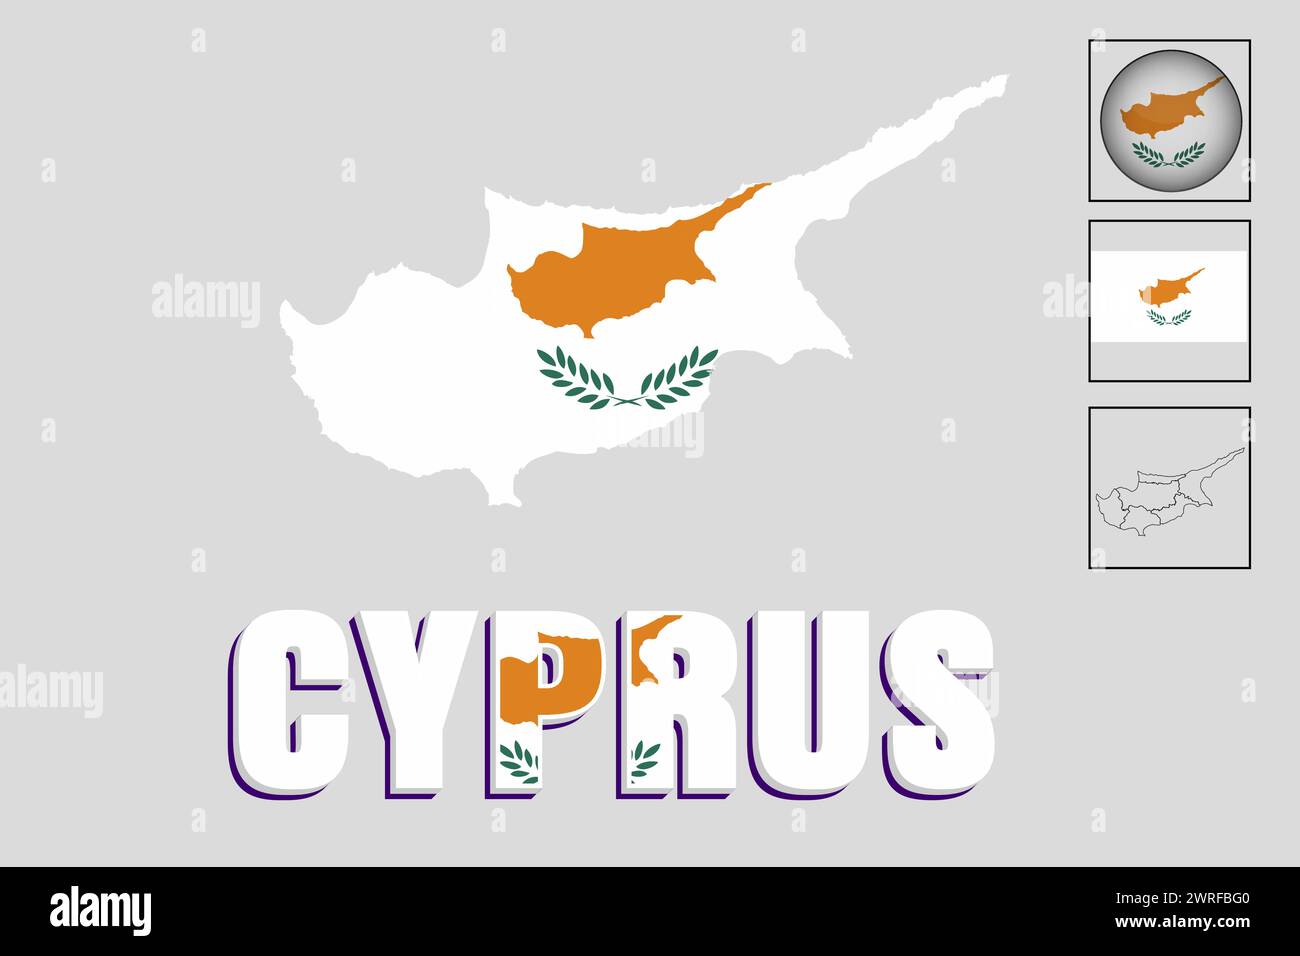 Cyprus flag and map in vector illustration Stock Vector